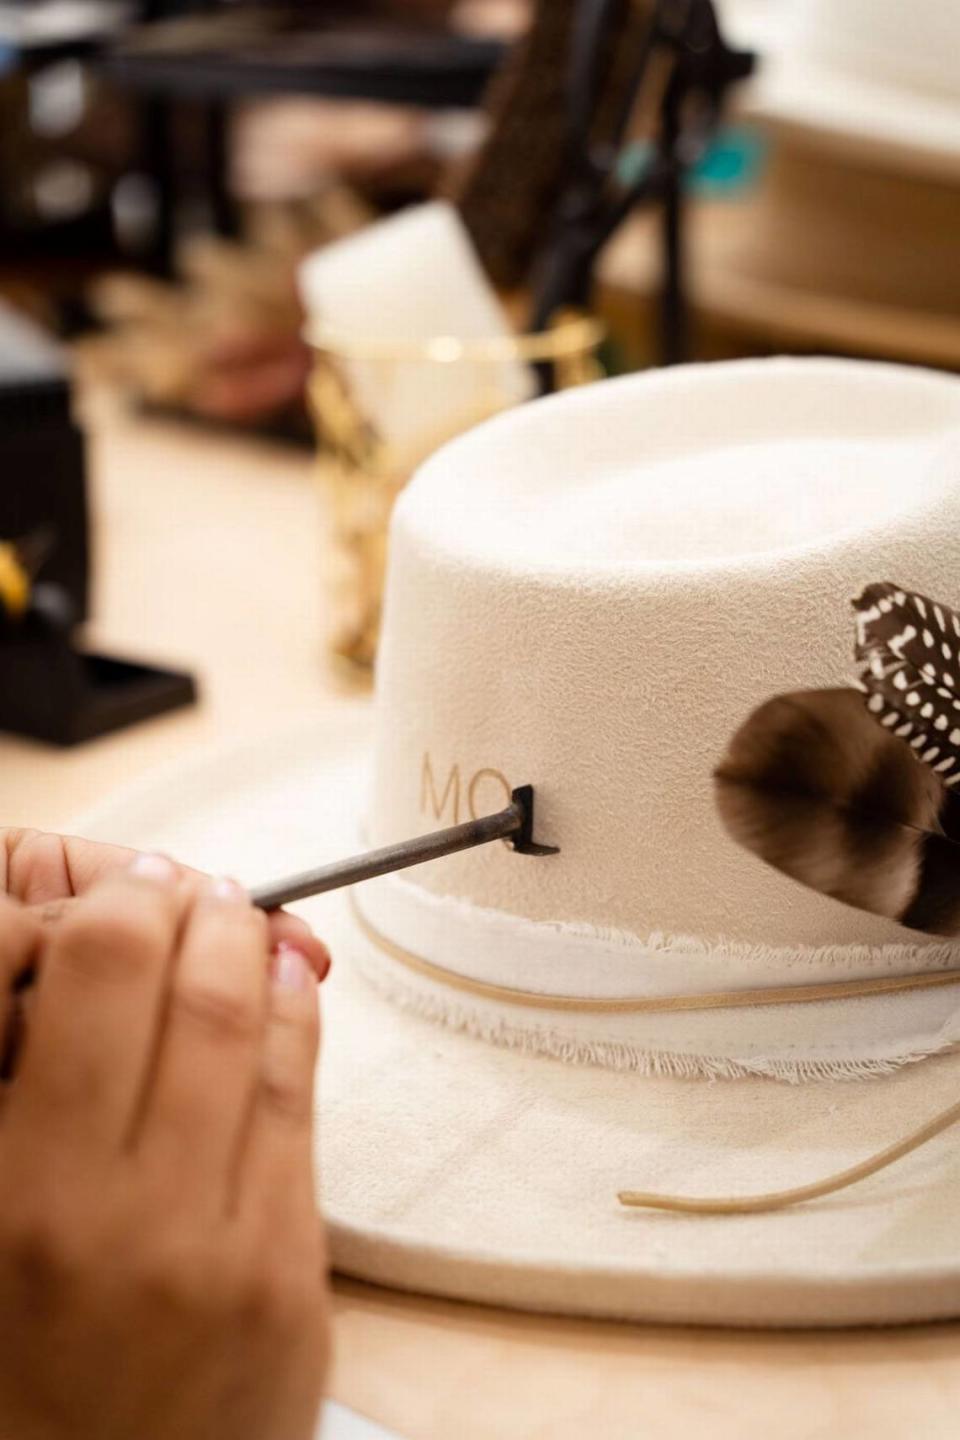 At The Hat Bar in San Luis Obispo, customers can design their own unique hats in a variety of ways, adding jewelry, ribbon and other accessories.